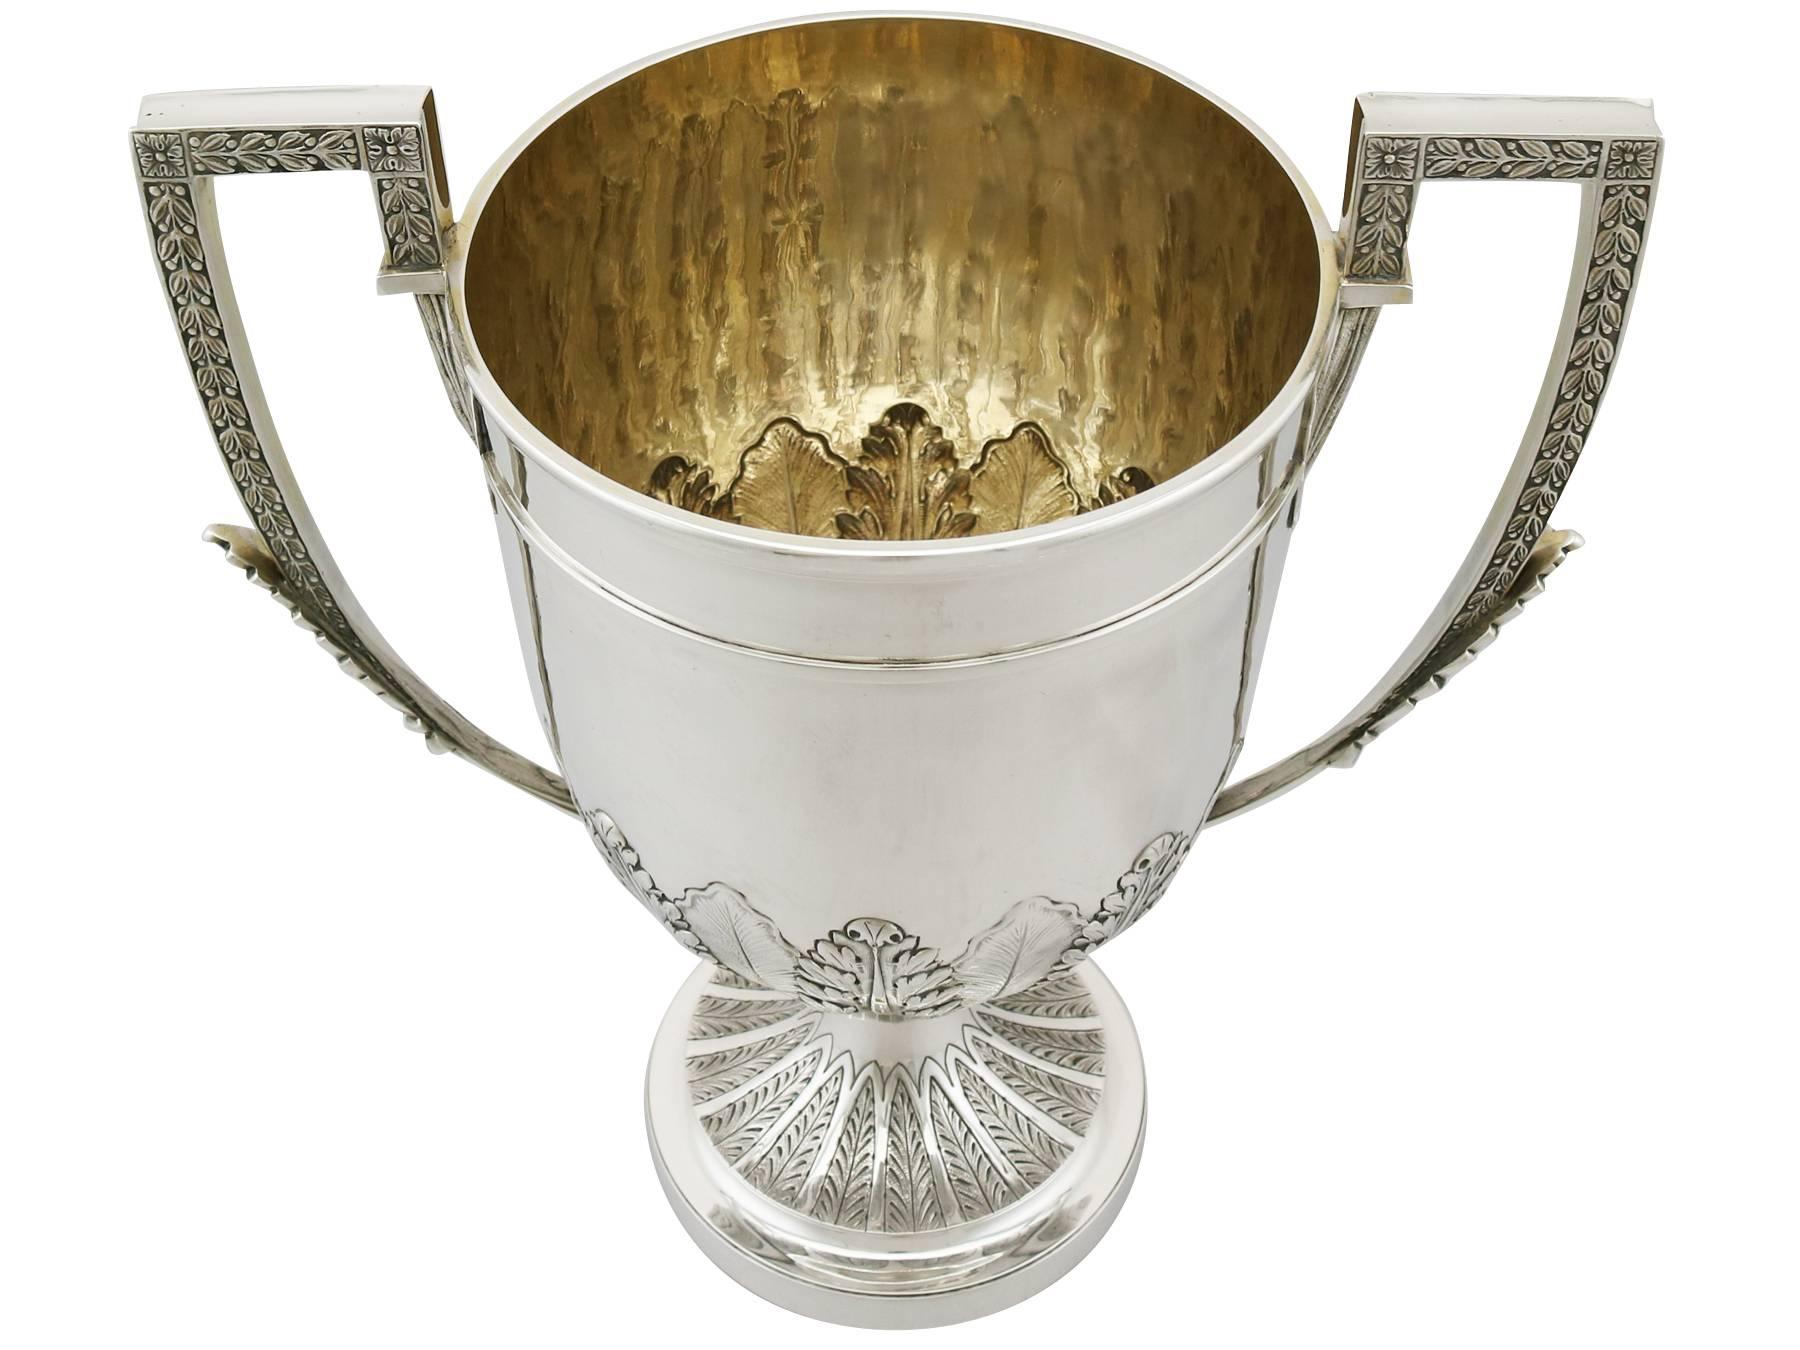 An exceptional, fine and impressive, large antique Victorian English sterling silver presentation trophy cup made by Charles Stuart Harris; an addition to our ornamental silverware collection

This exceptional antique Victorian large silver trophy